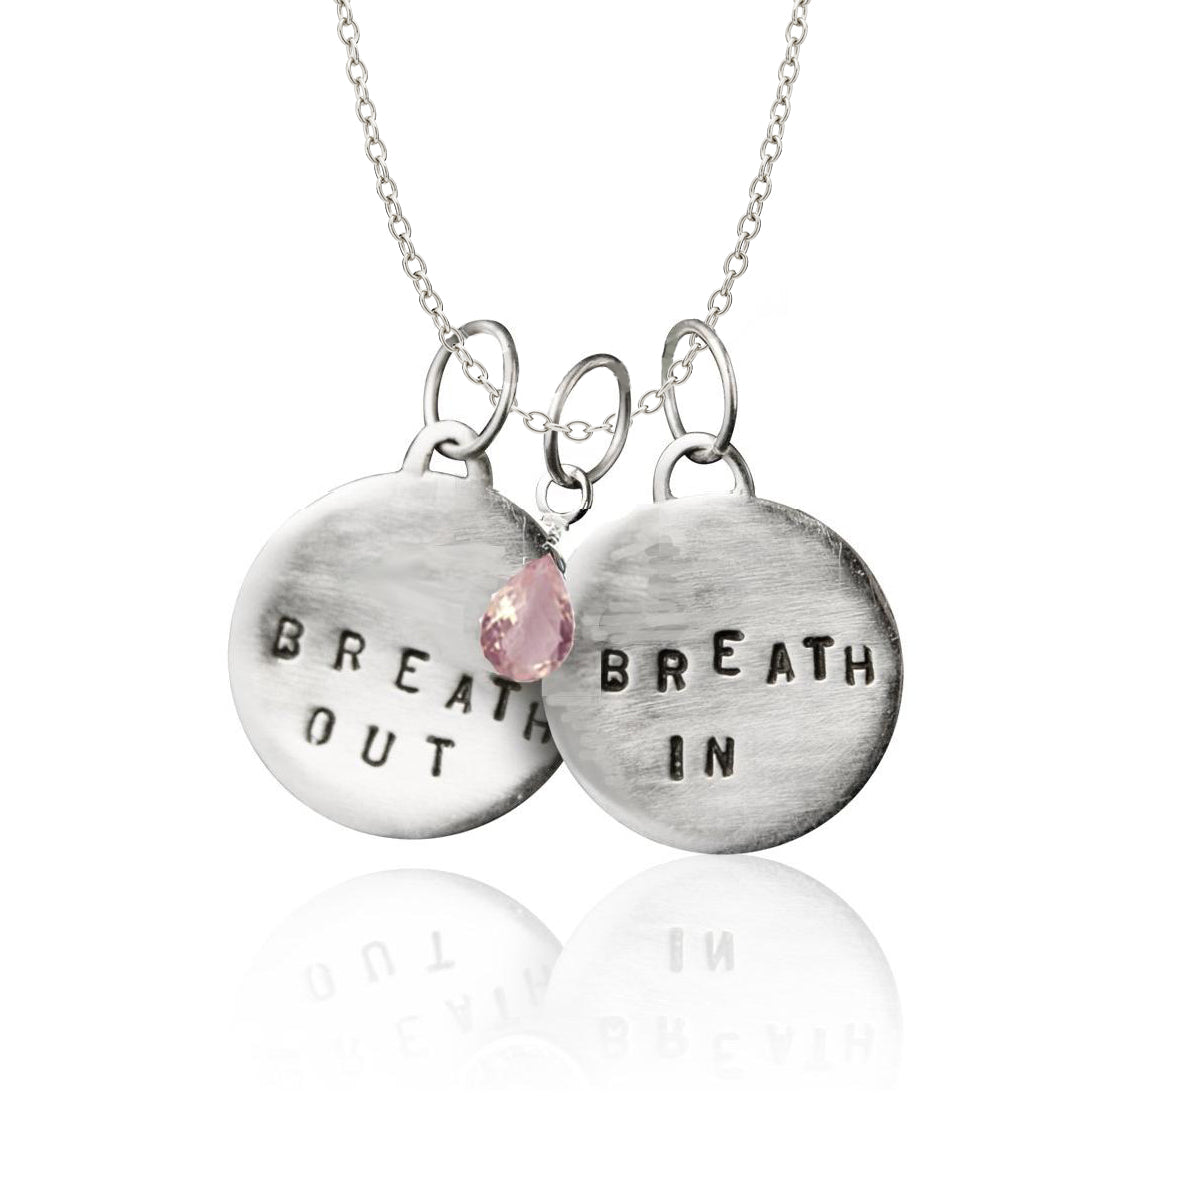 Breath In - Breath Out Necklace with Rose Quartz for Compassion and to Heal Your Heart